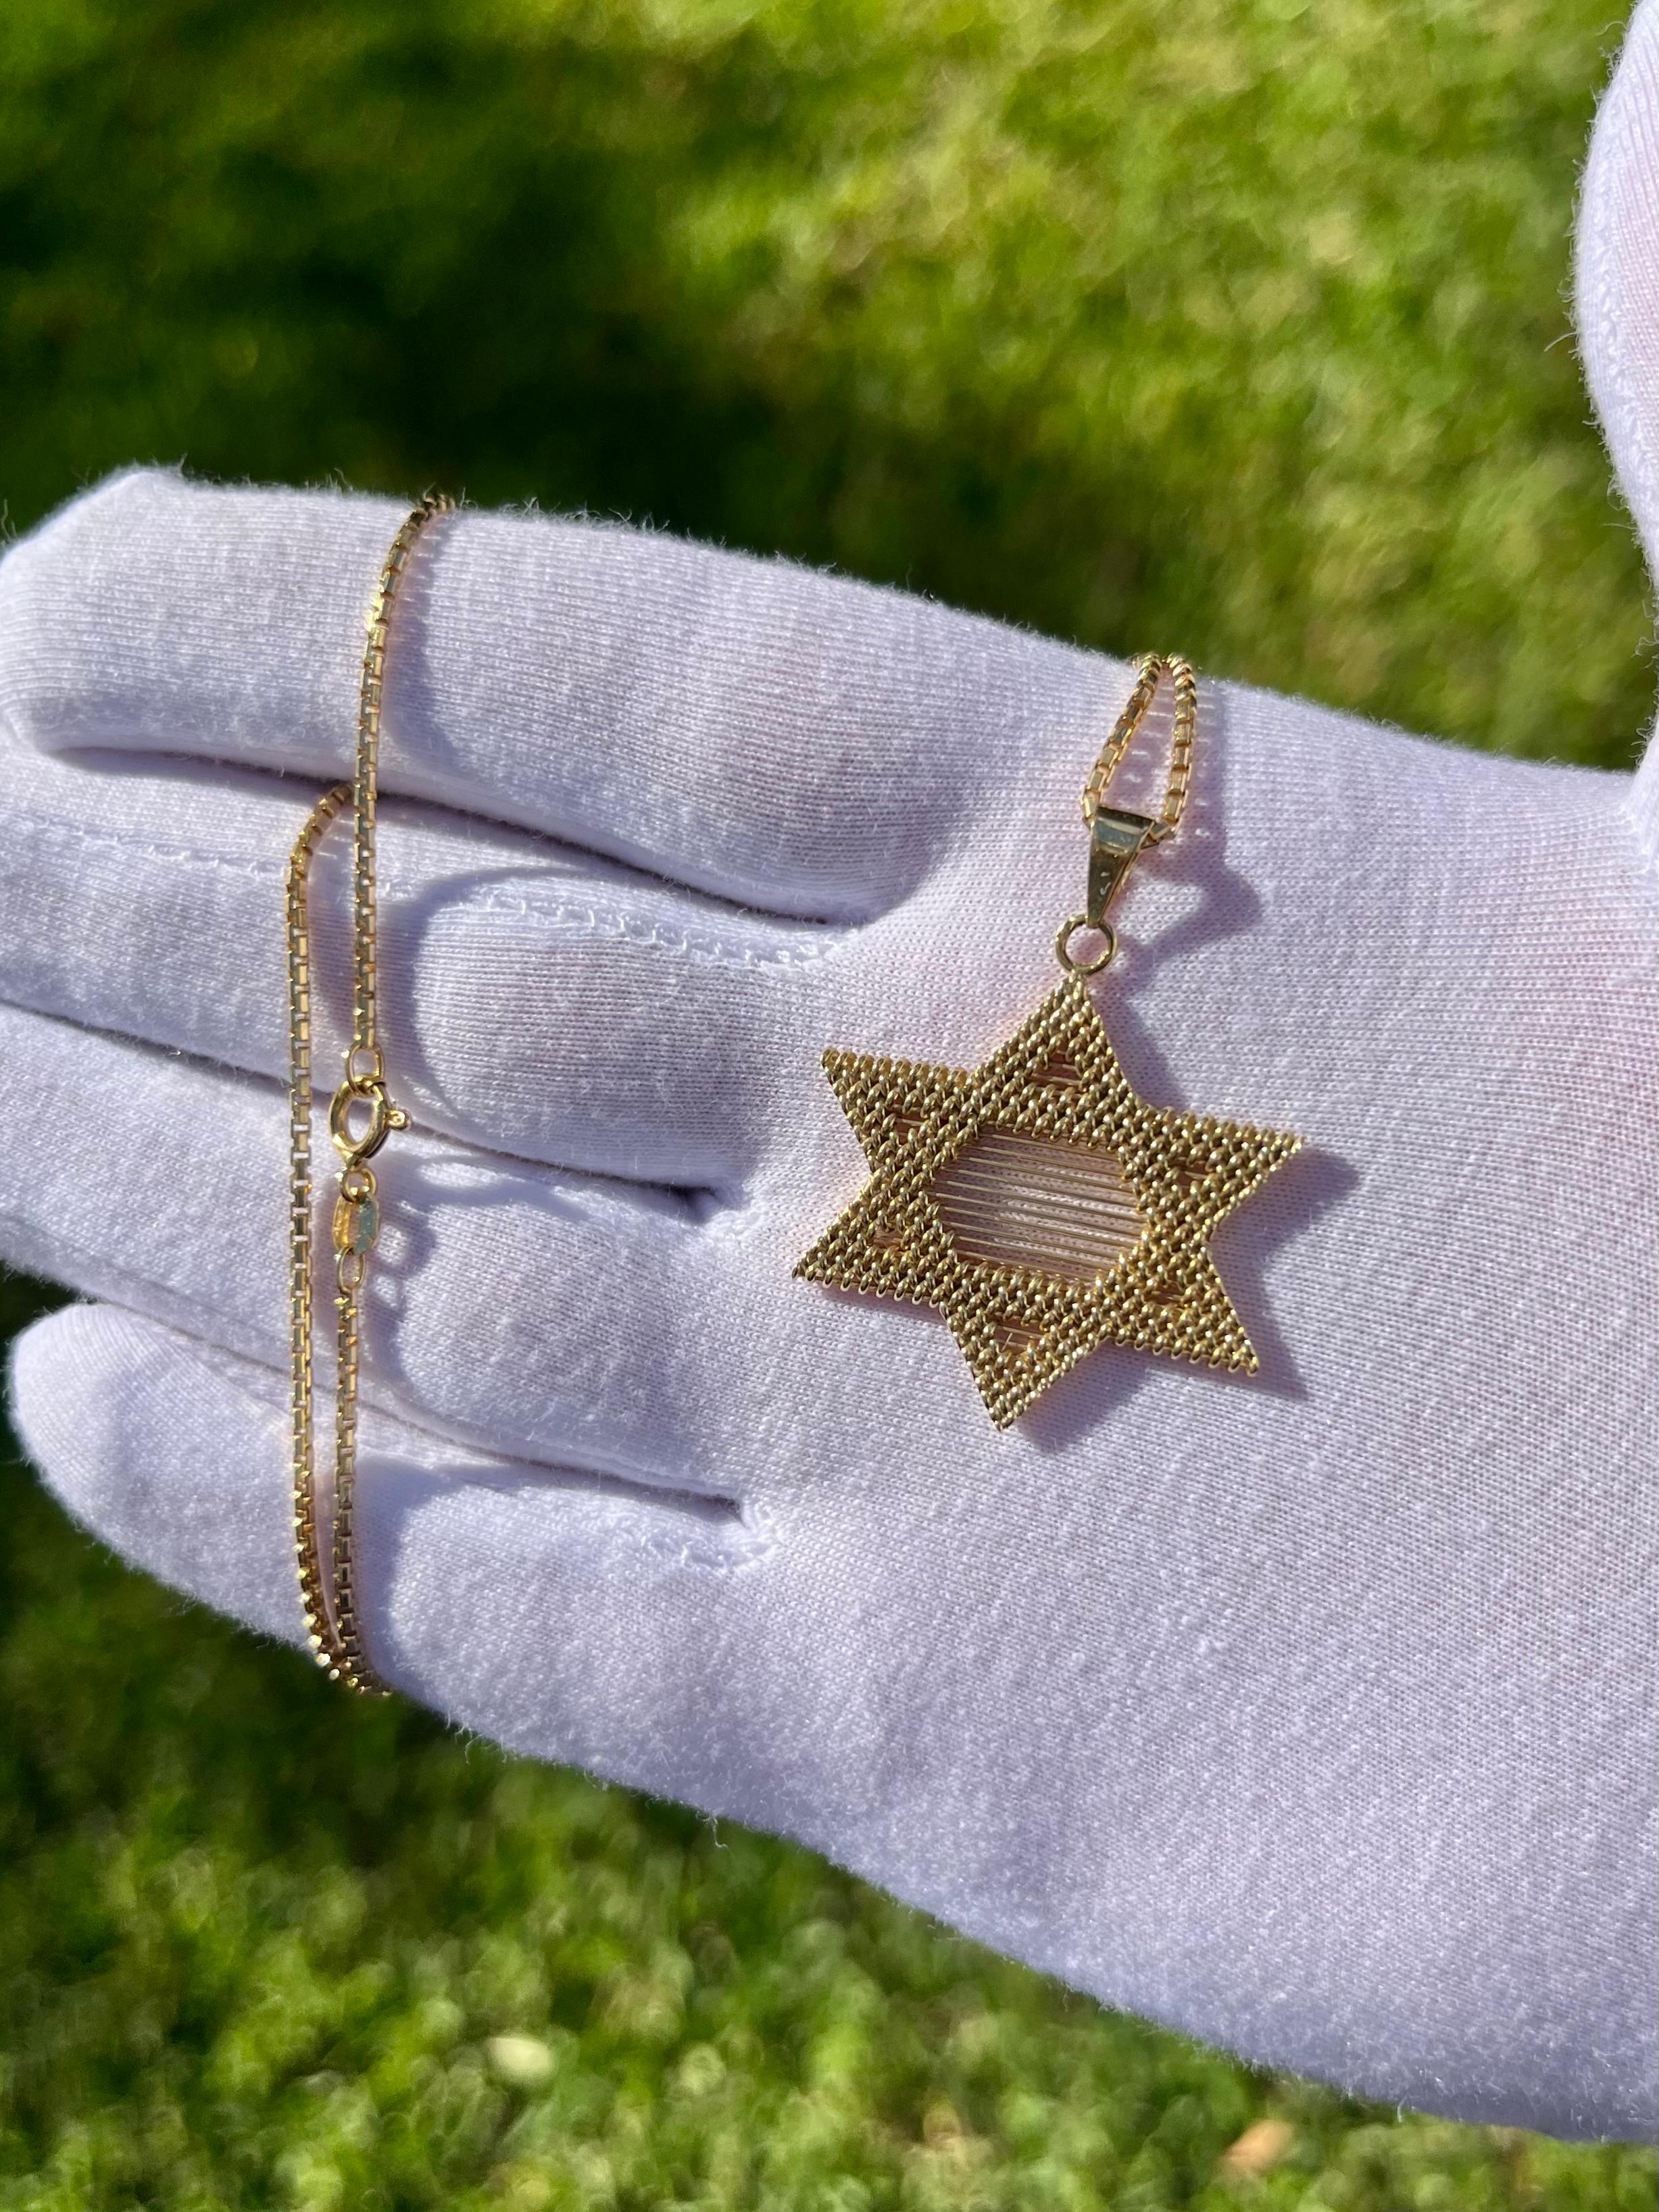 14 karat solid yellow gold Star of David pendant necklace. The pendant has a beautiful textured finish that sparkles under sunlight. Hypoallergenic, double rhodium-plated, and secure ball clip closure. A piece that is ideal for everyday wear. The